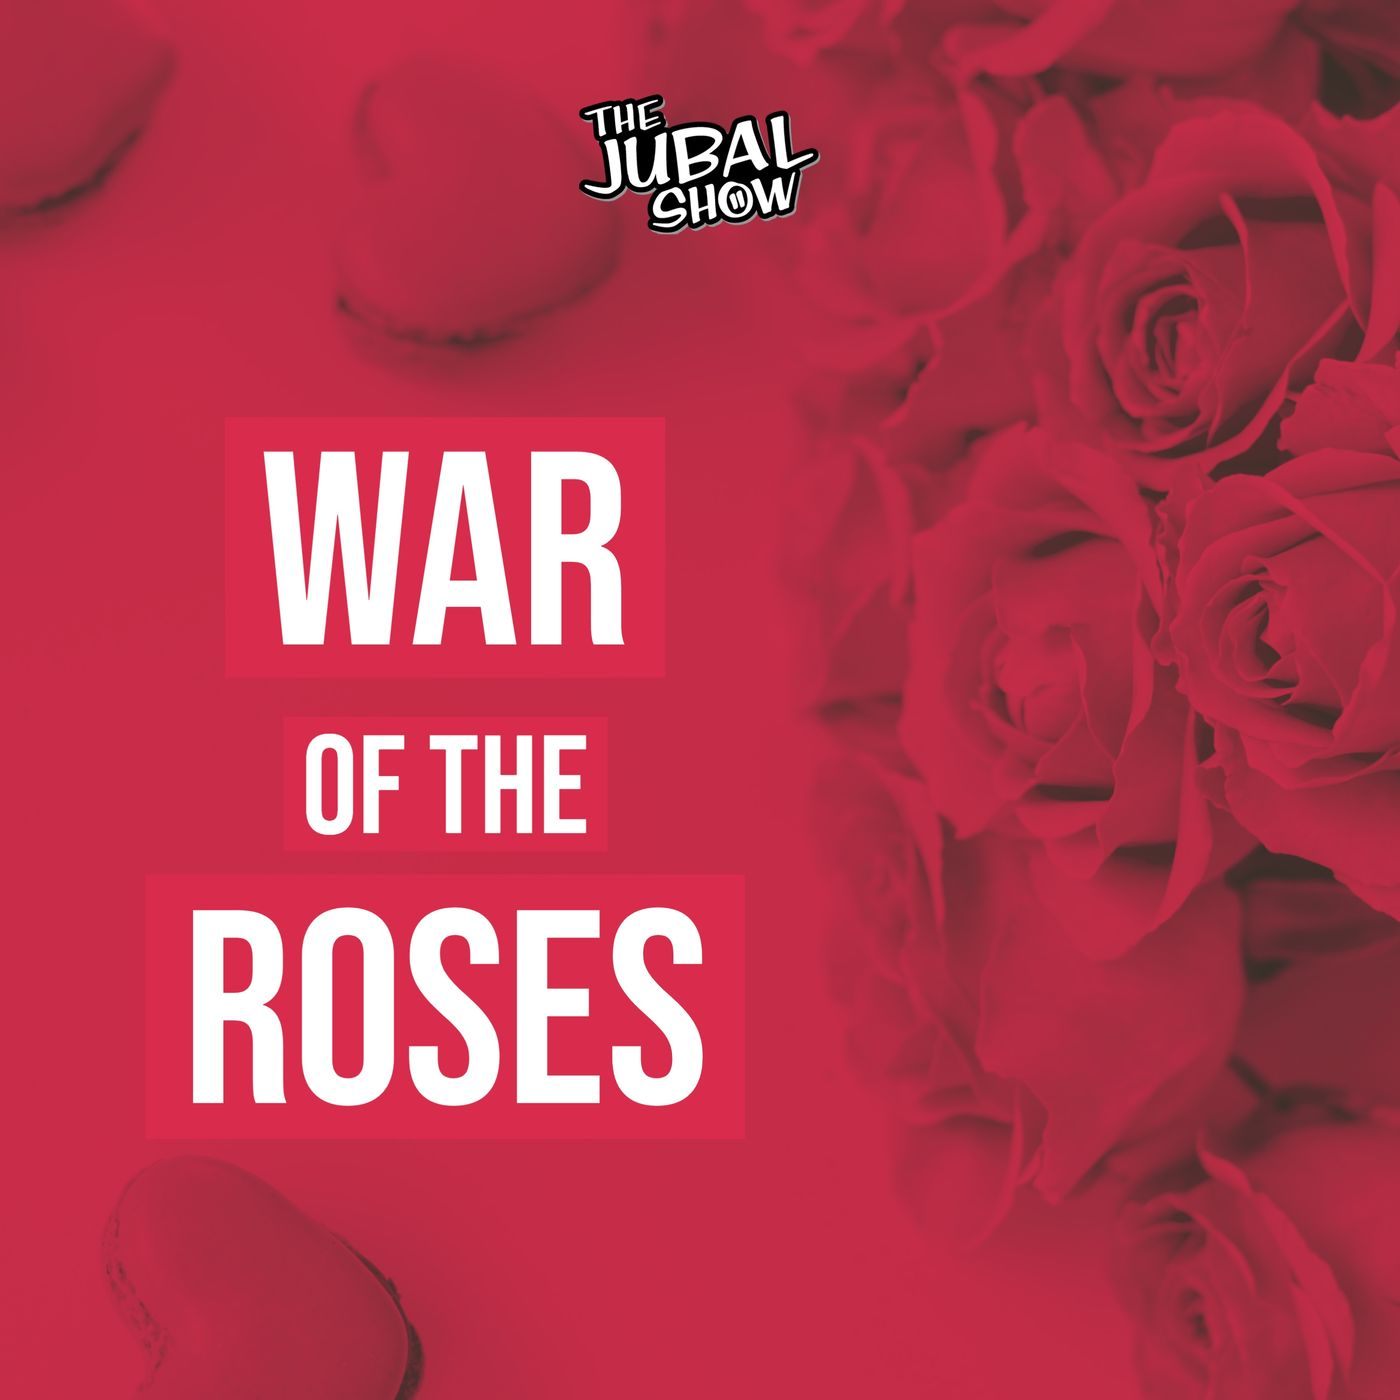 Is Asking What Time You Will be Over Suspicious? Find out in War Of The Roses!